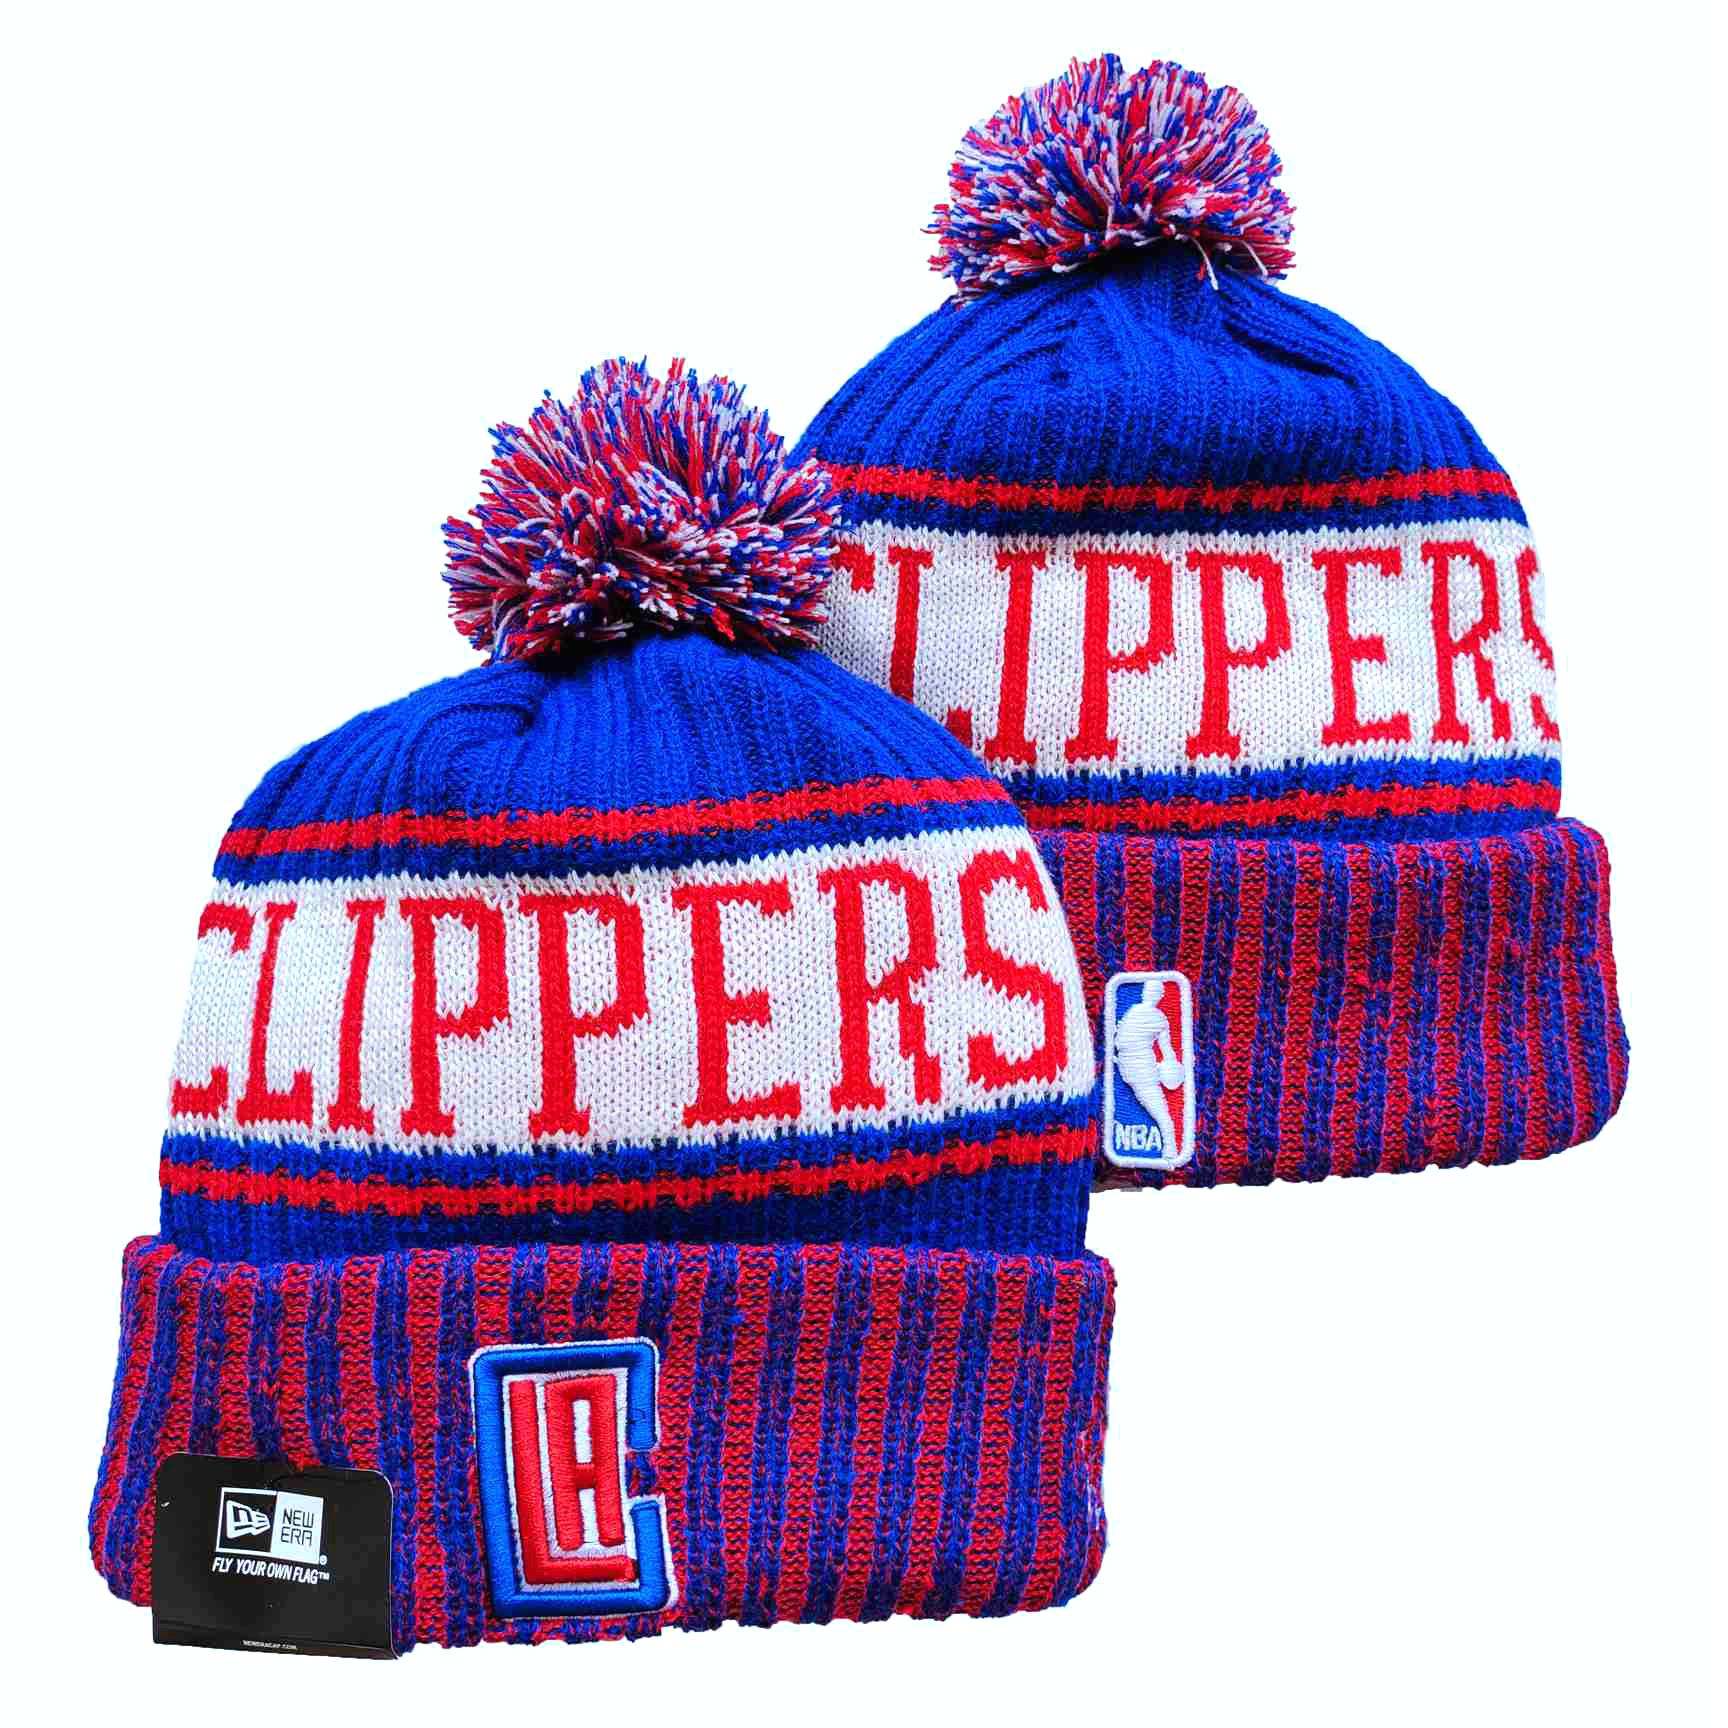 NBA Los Angeles Clippers Beanies Knit Hats-YD509